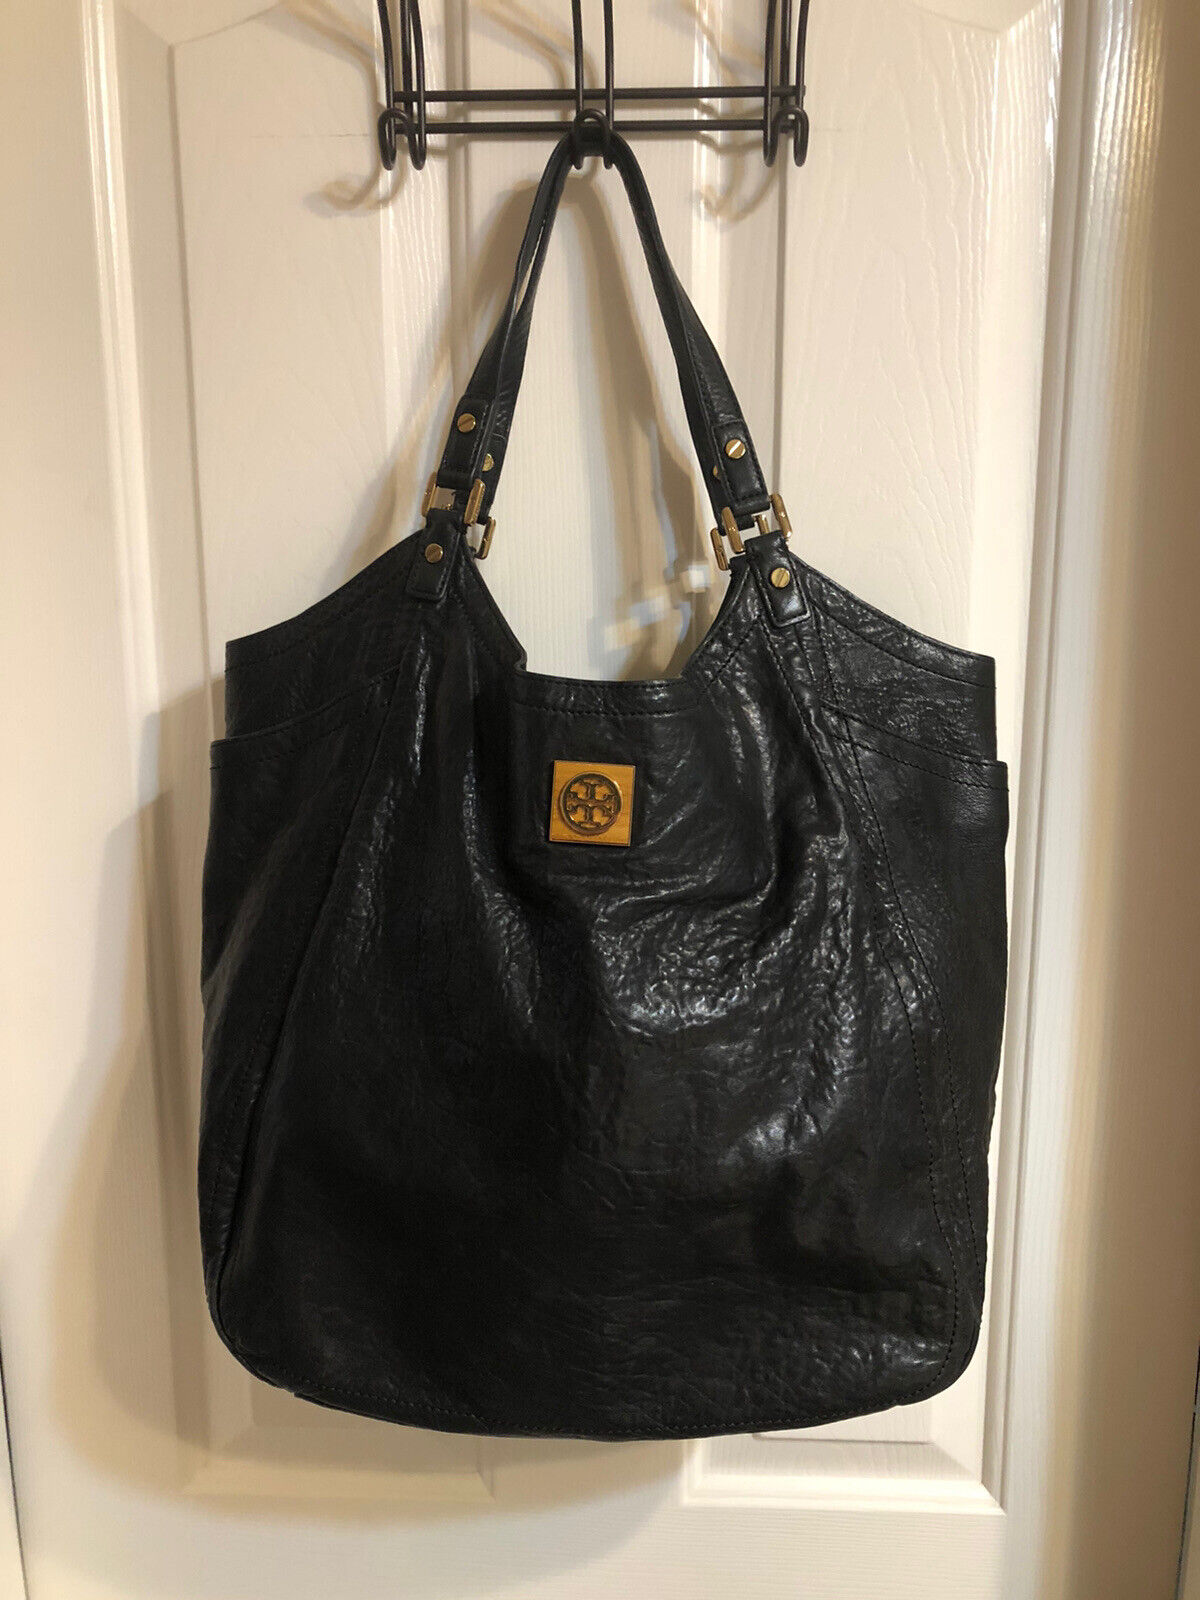 Tory Burch Louisa Slouchy Leather Black Carryall Tote bag Extra Large  Handbag